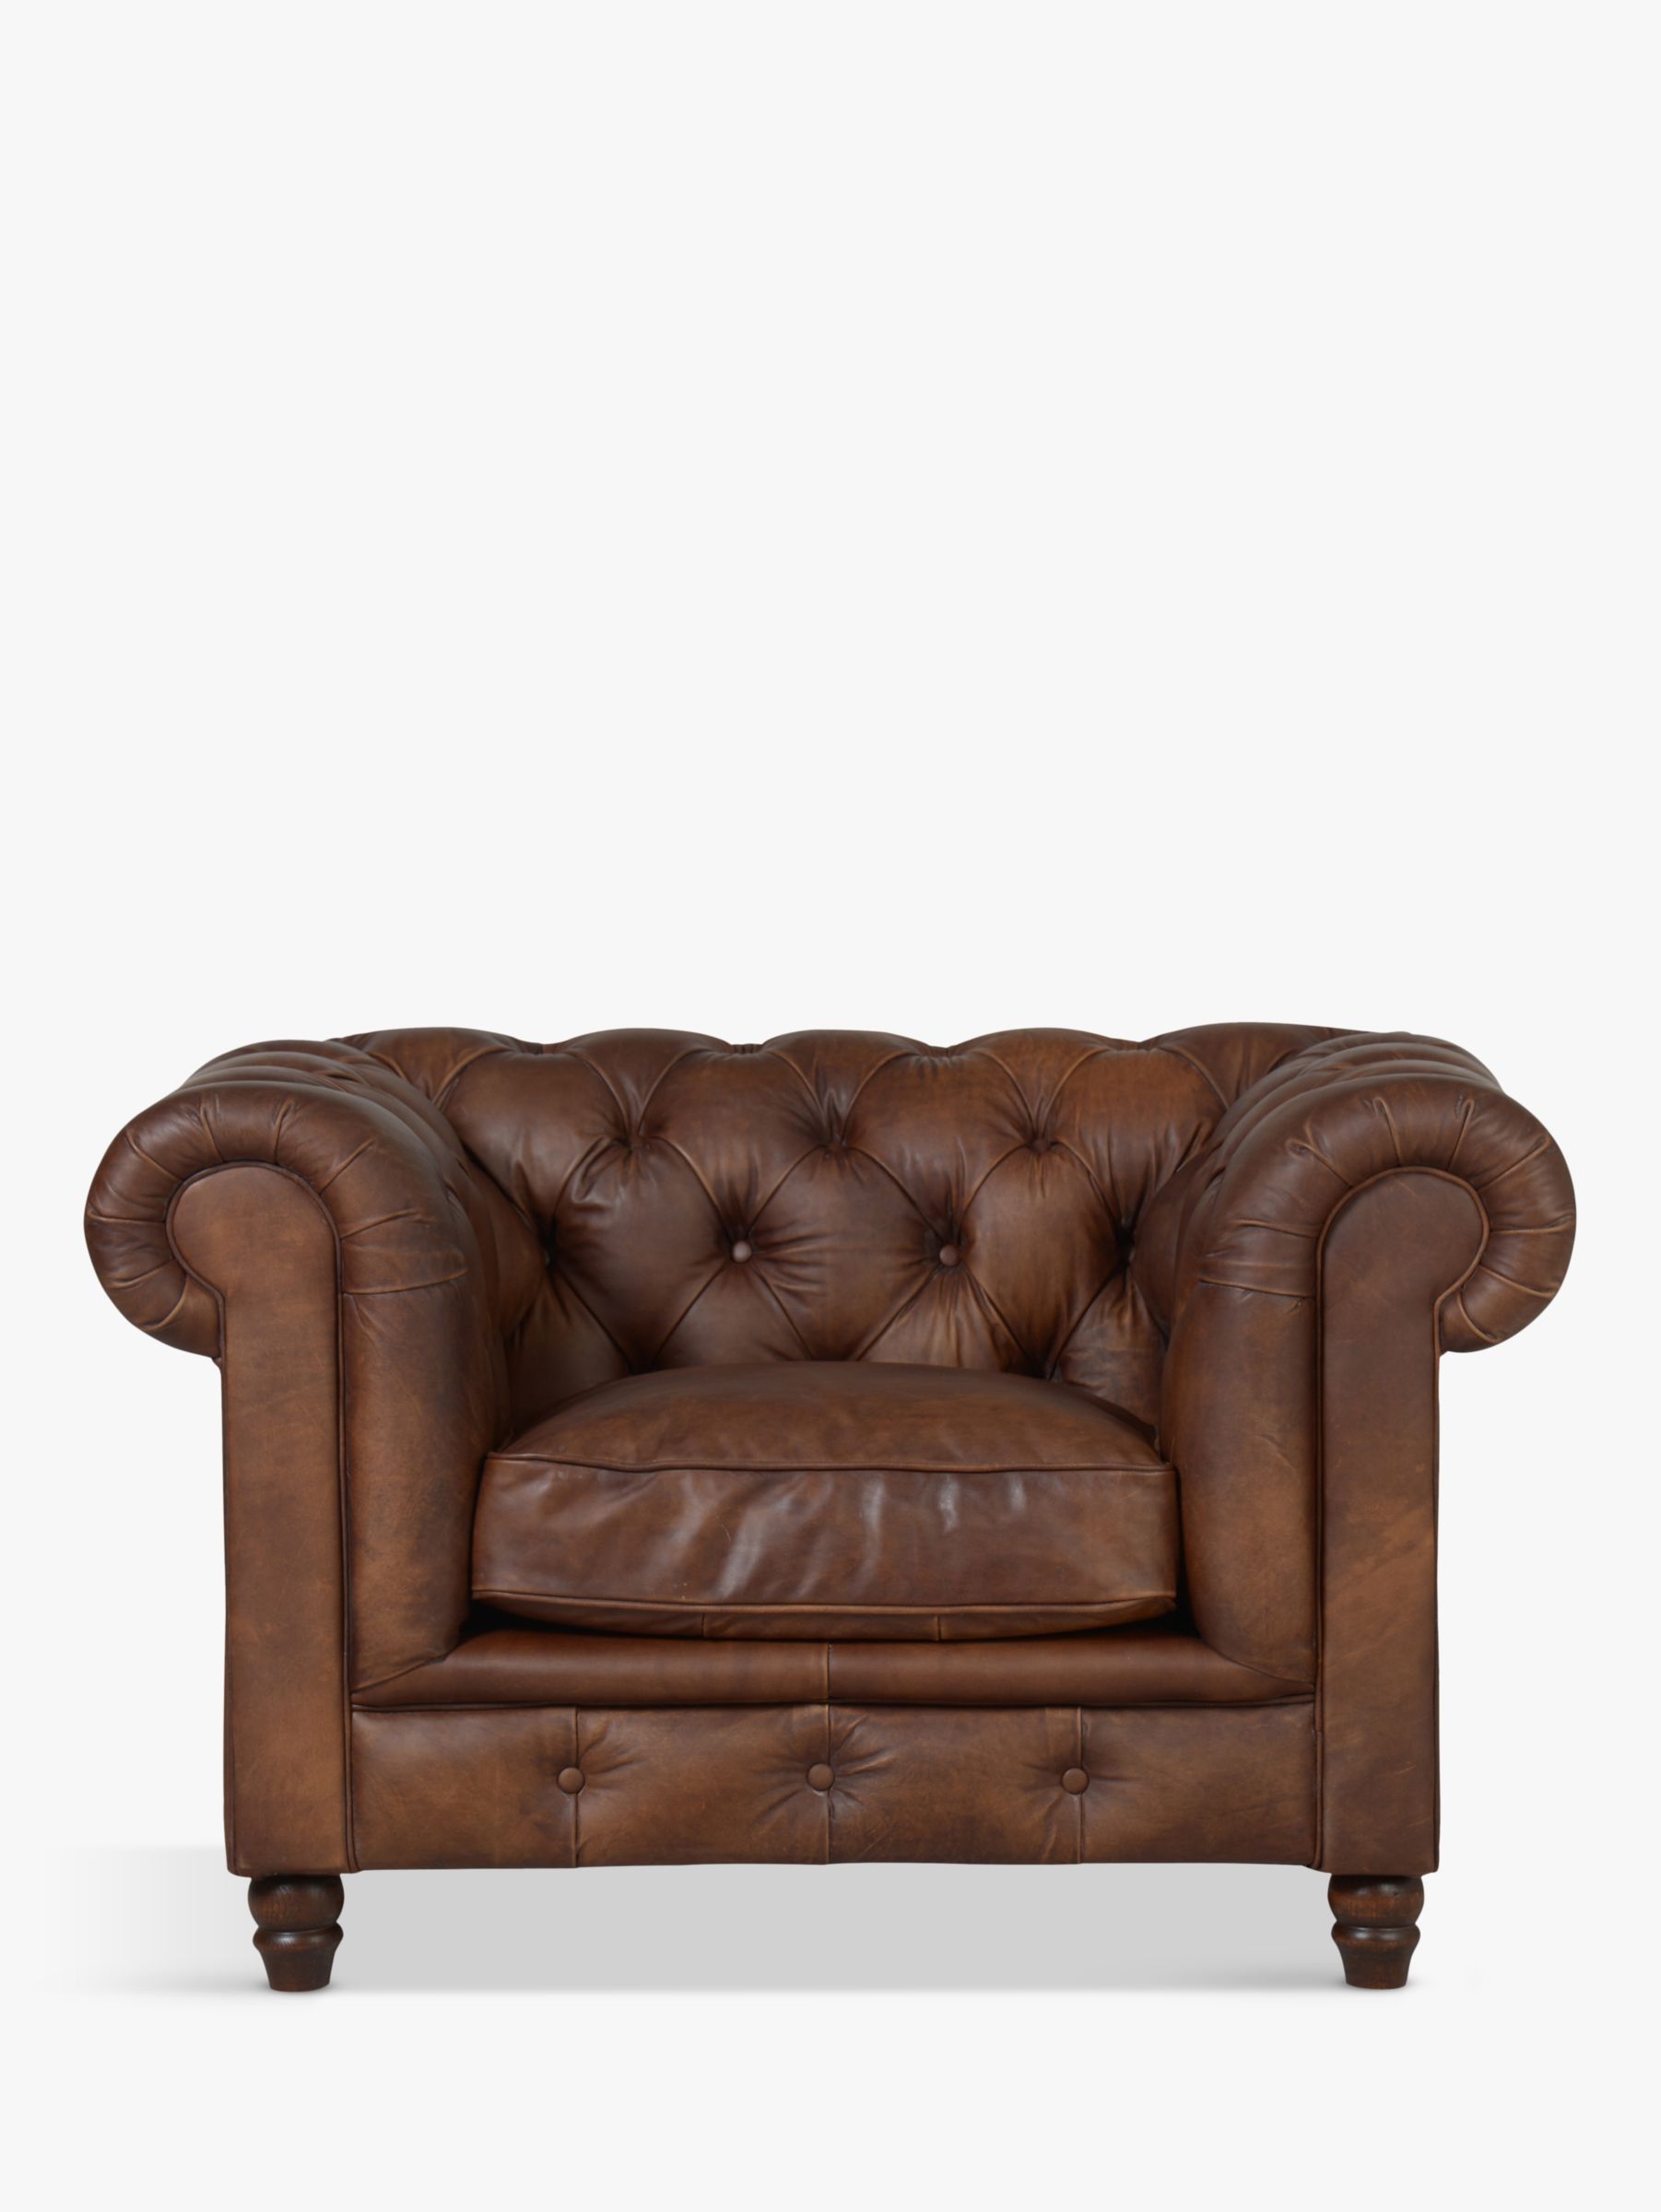 Earle Range, Halo Earle Chesterfield Leather Armchair, Antique Whisky